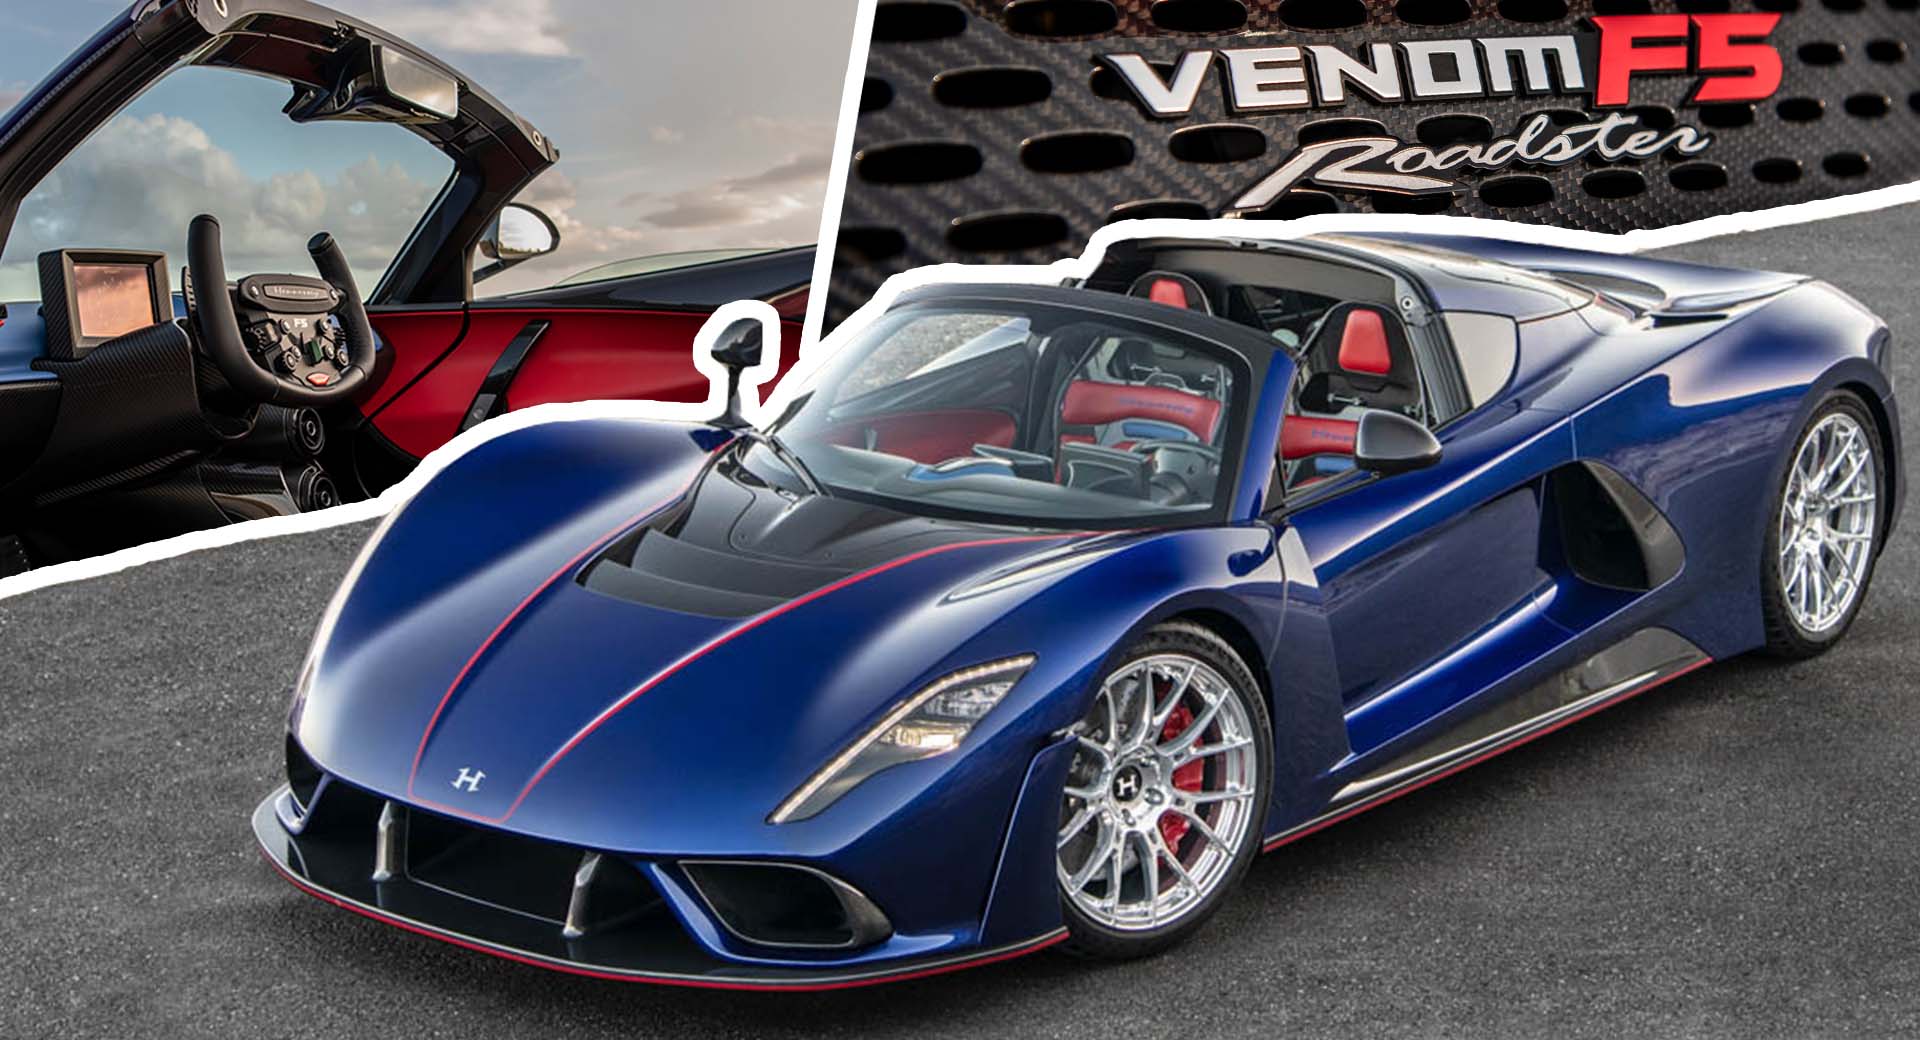 Venom F5 sold out, Hennessey planning something 'out of this world